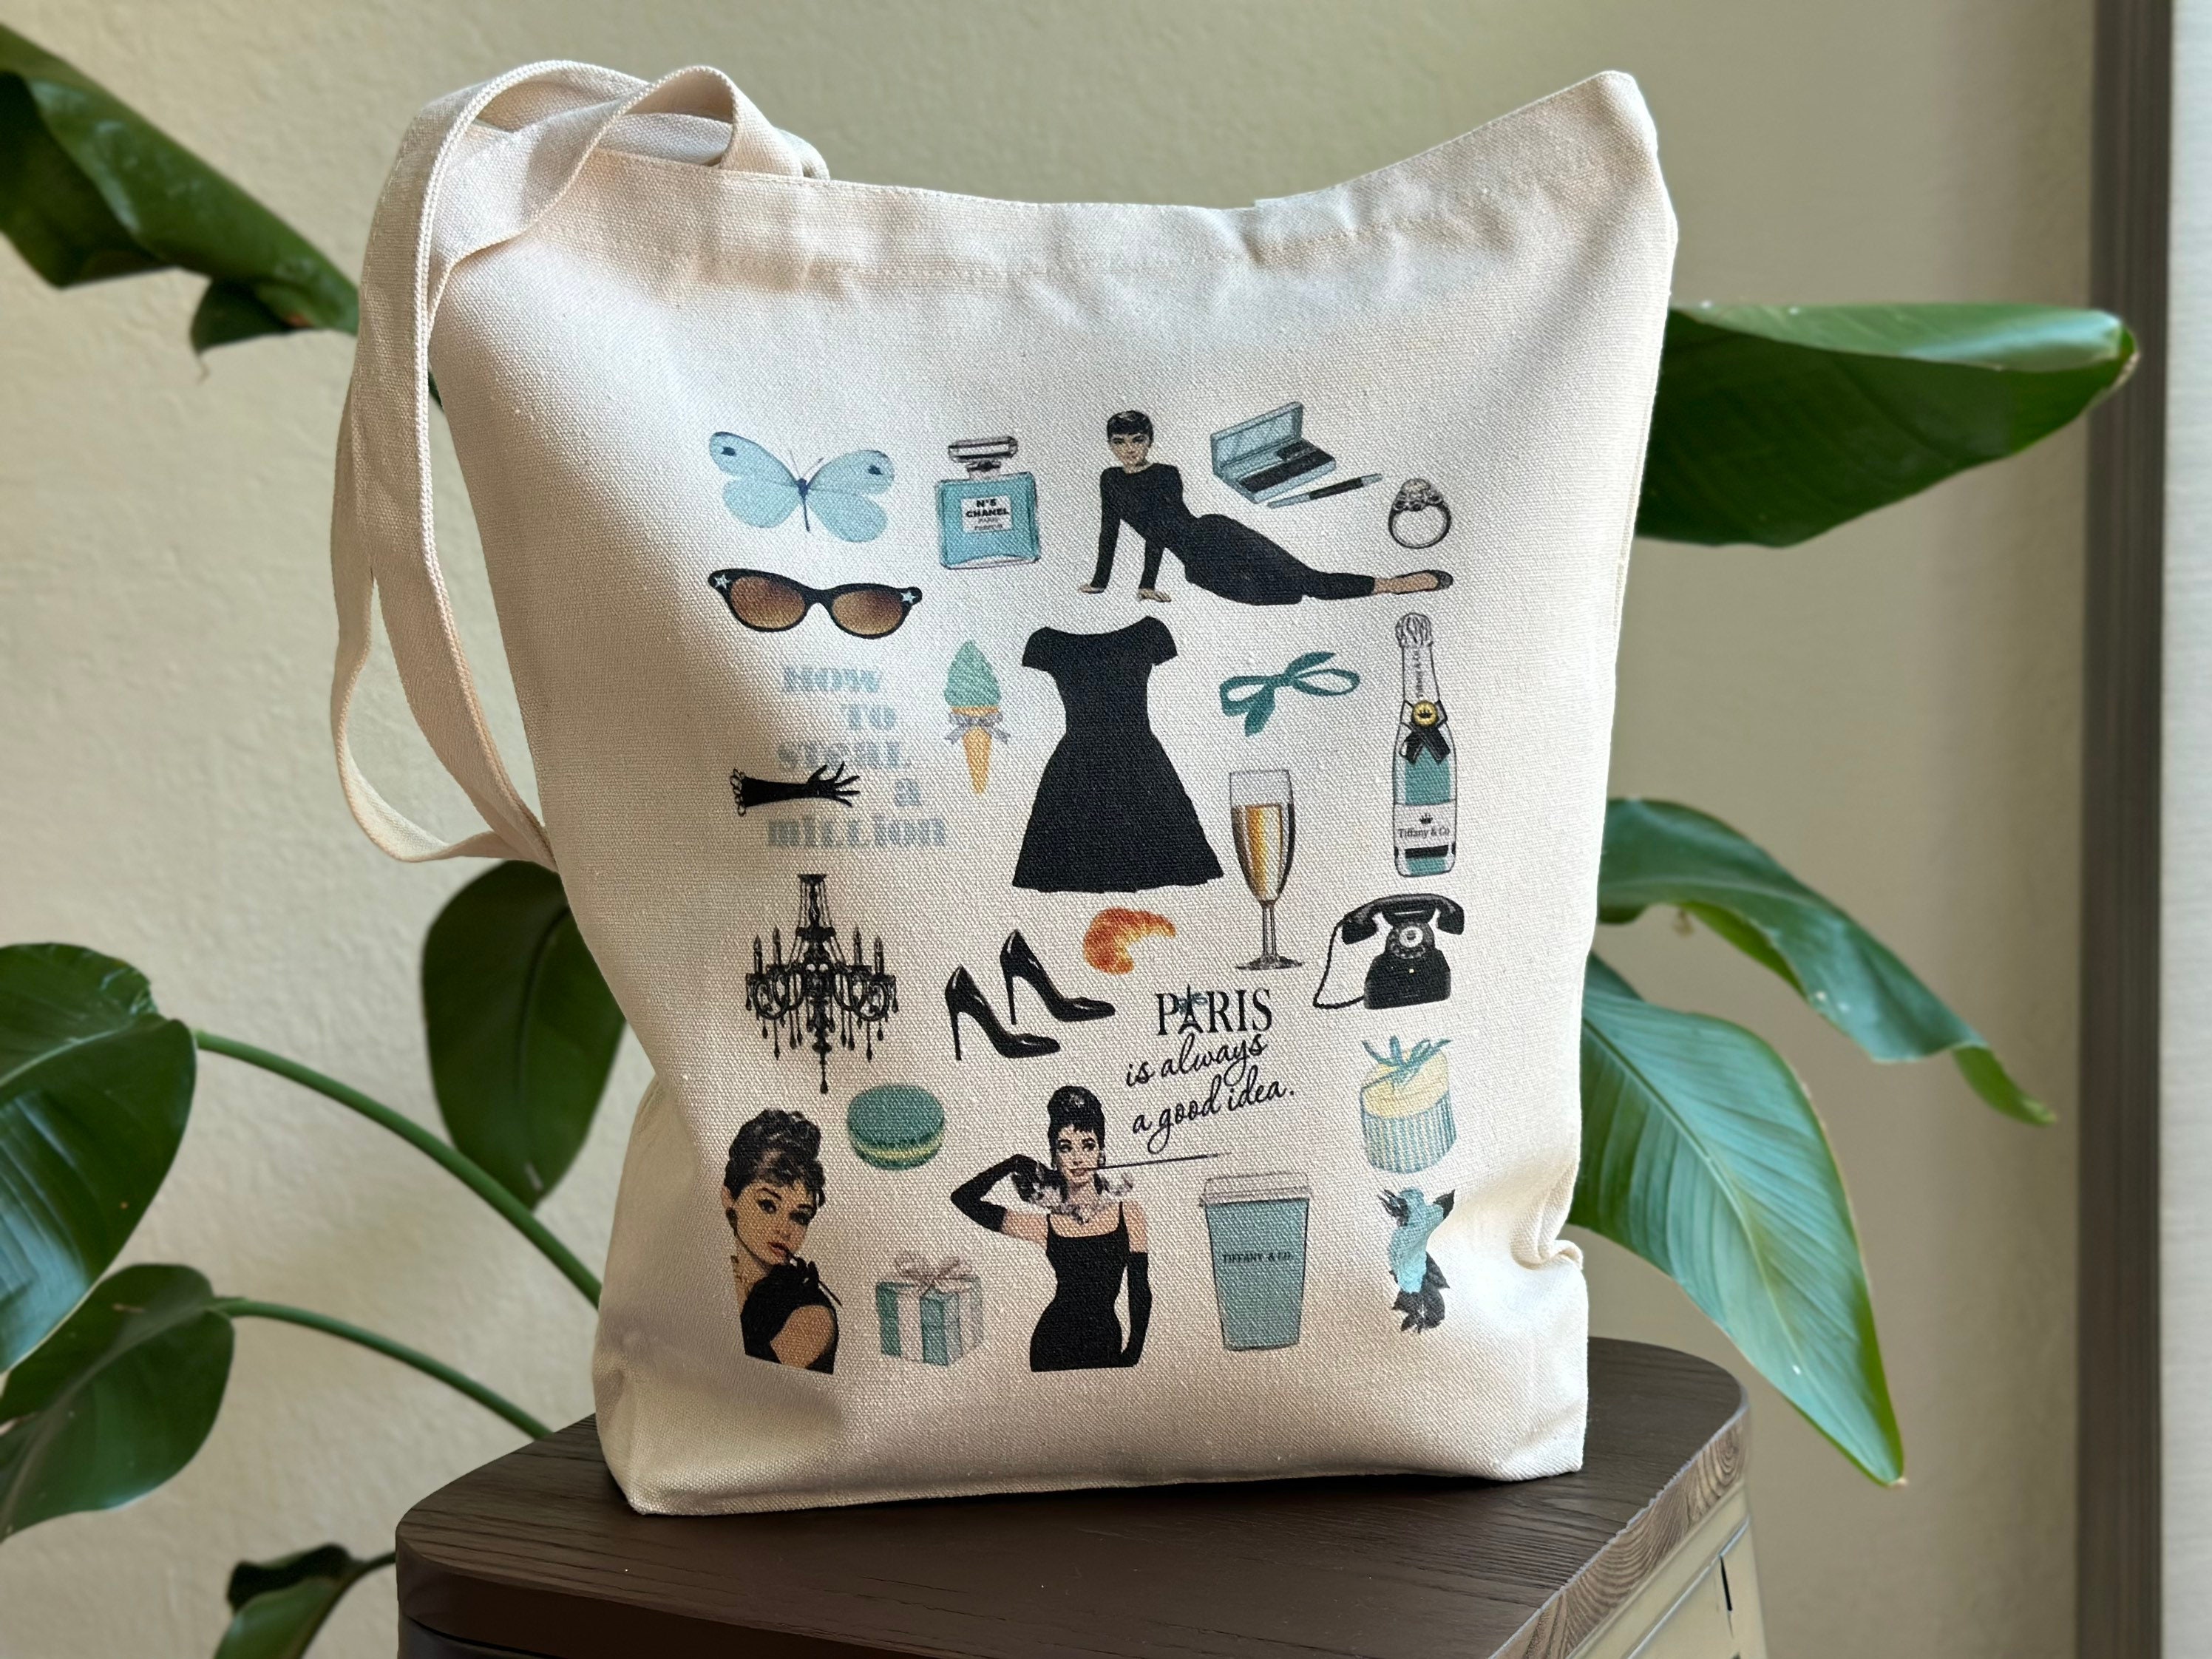 Tiffany style shopping Bags — Auspicious Laundry Store